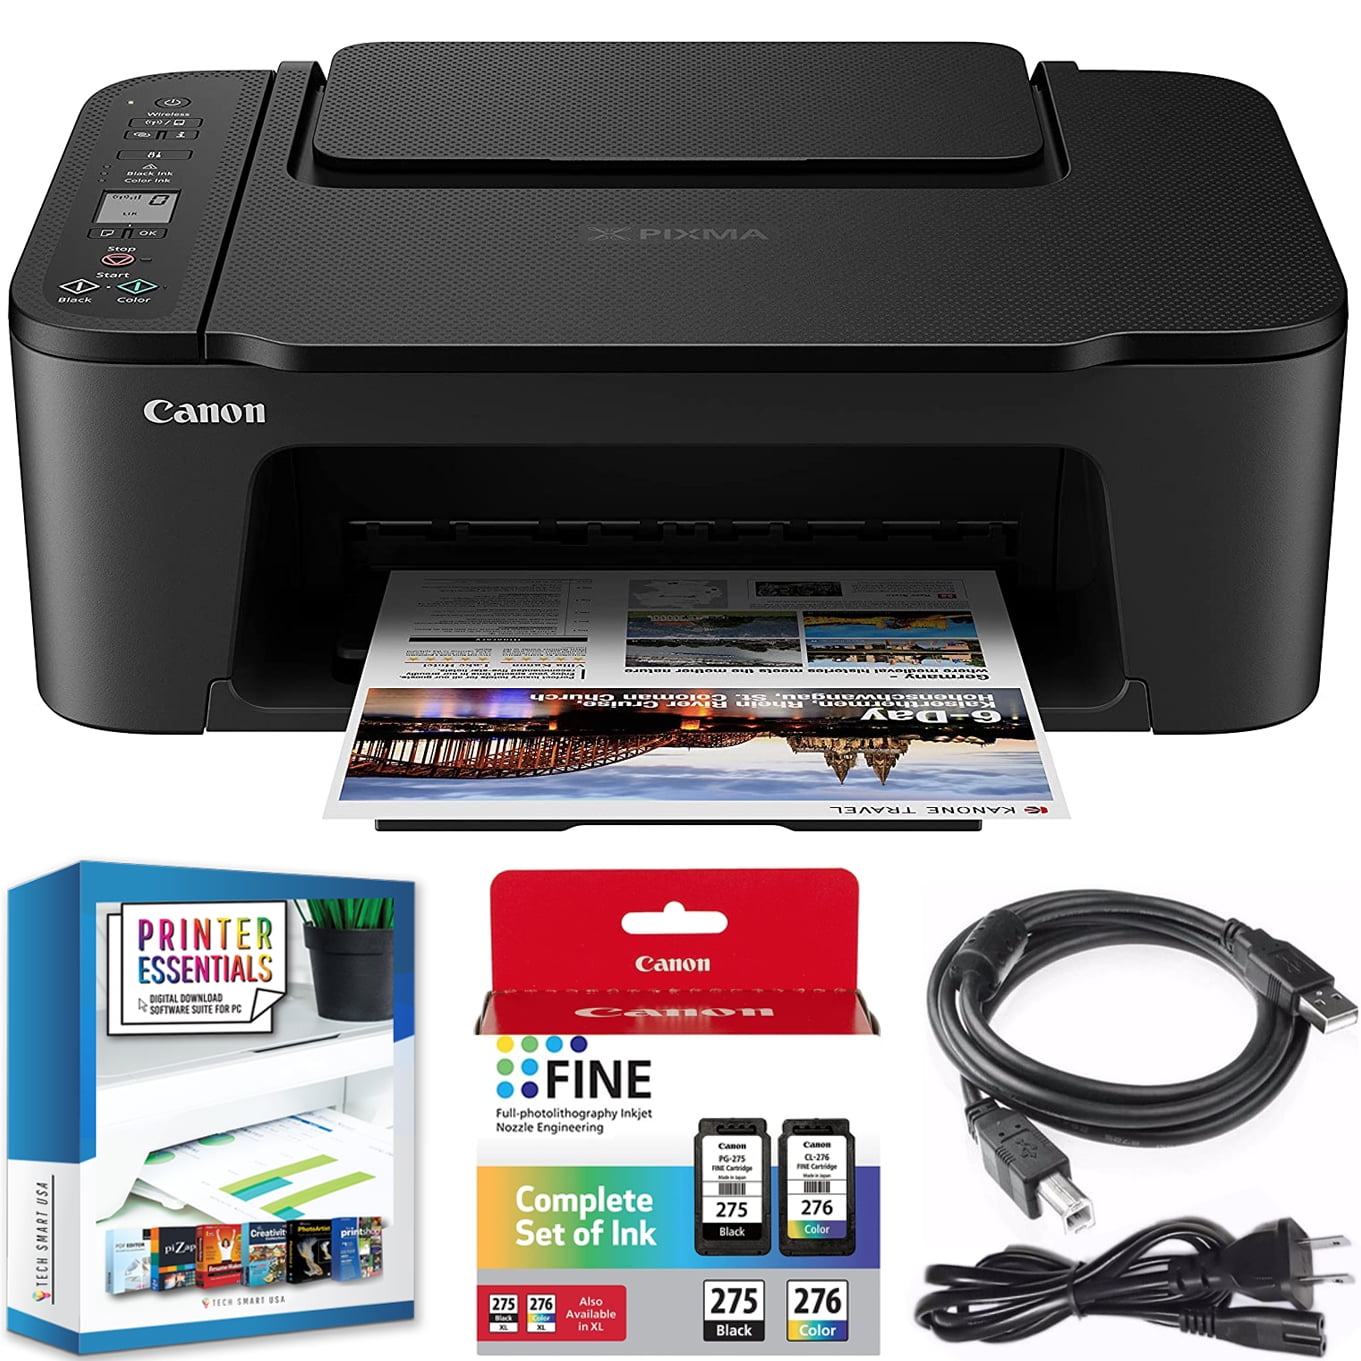 Canon PIXMA TS3450 (2 stores) find the best price now »